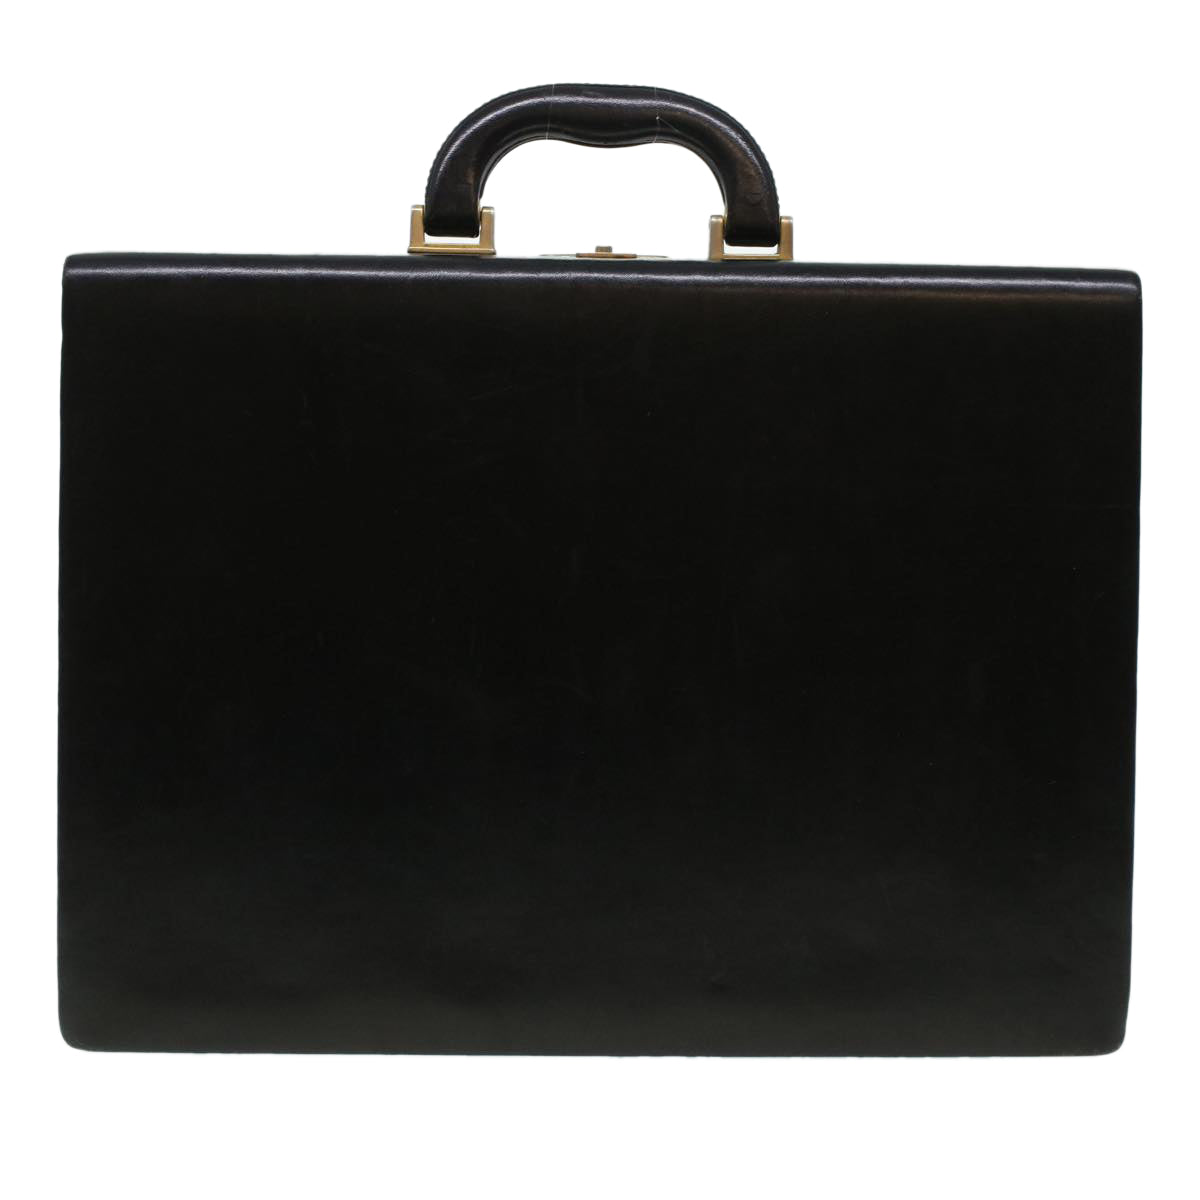 BALLY Business Bag Leather Black Auth bs5470 - 0